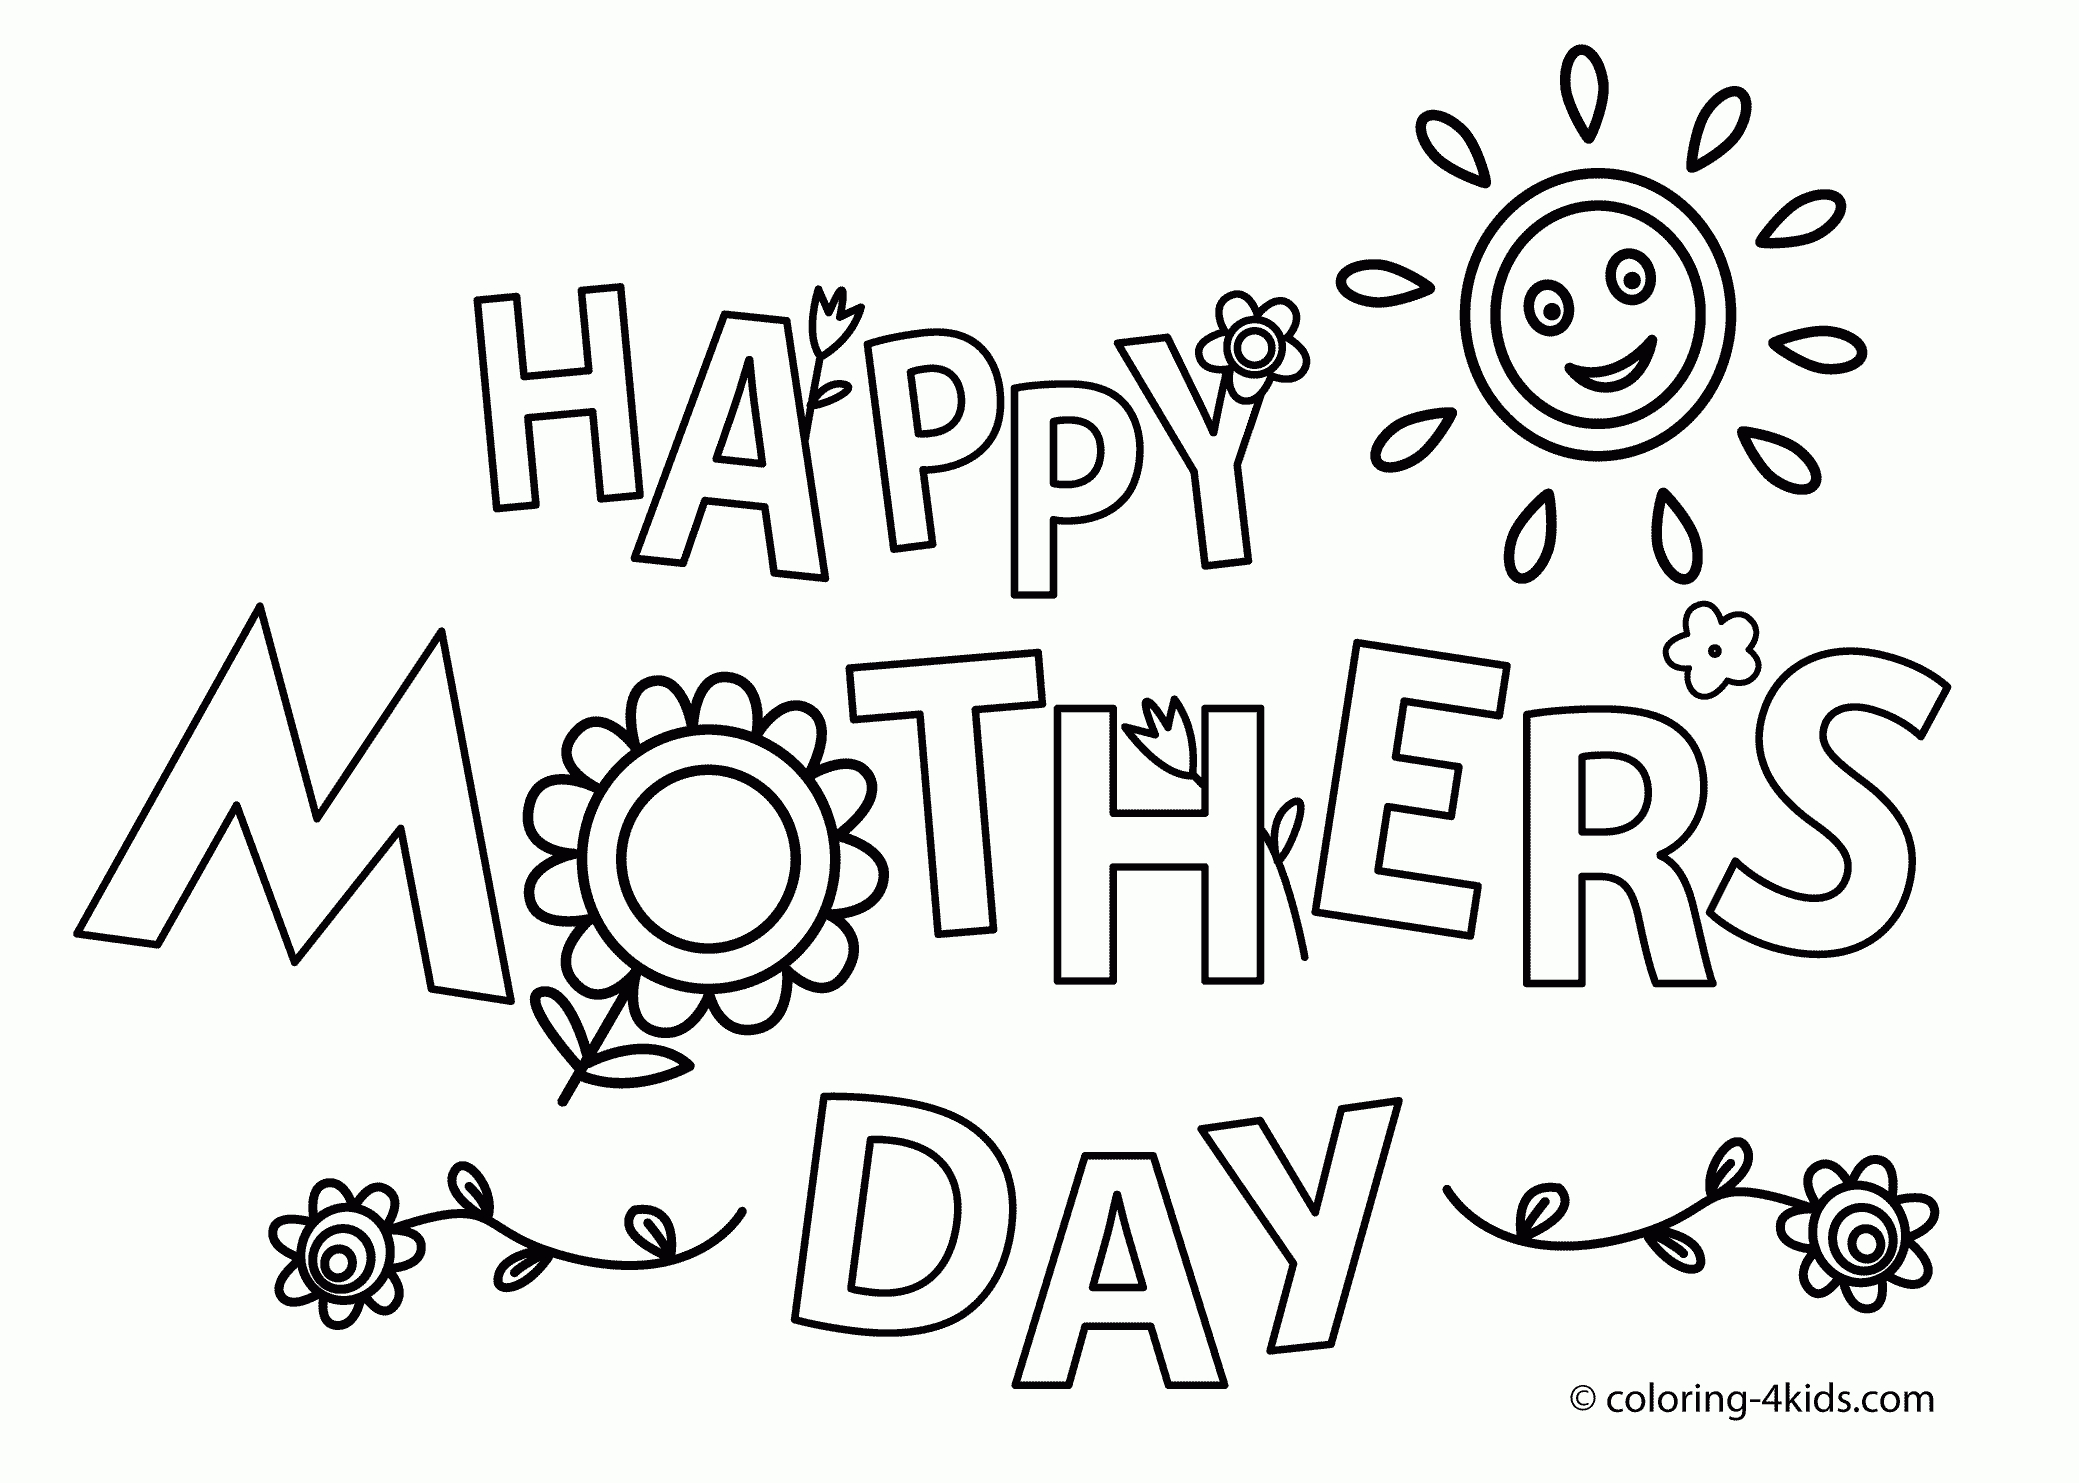 Free Printable Mothers Day Coloring Pages - Free Printable Calendar - Free Printable Mothers Day Coloring Cards